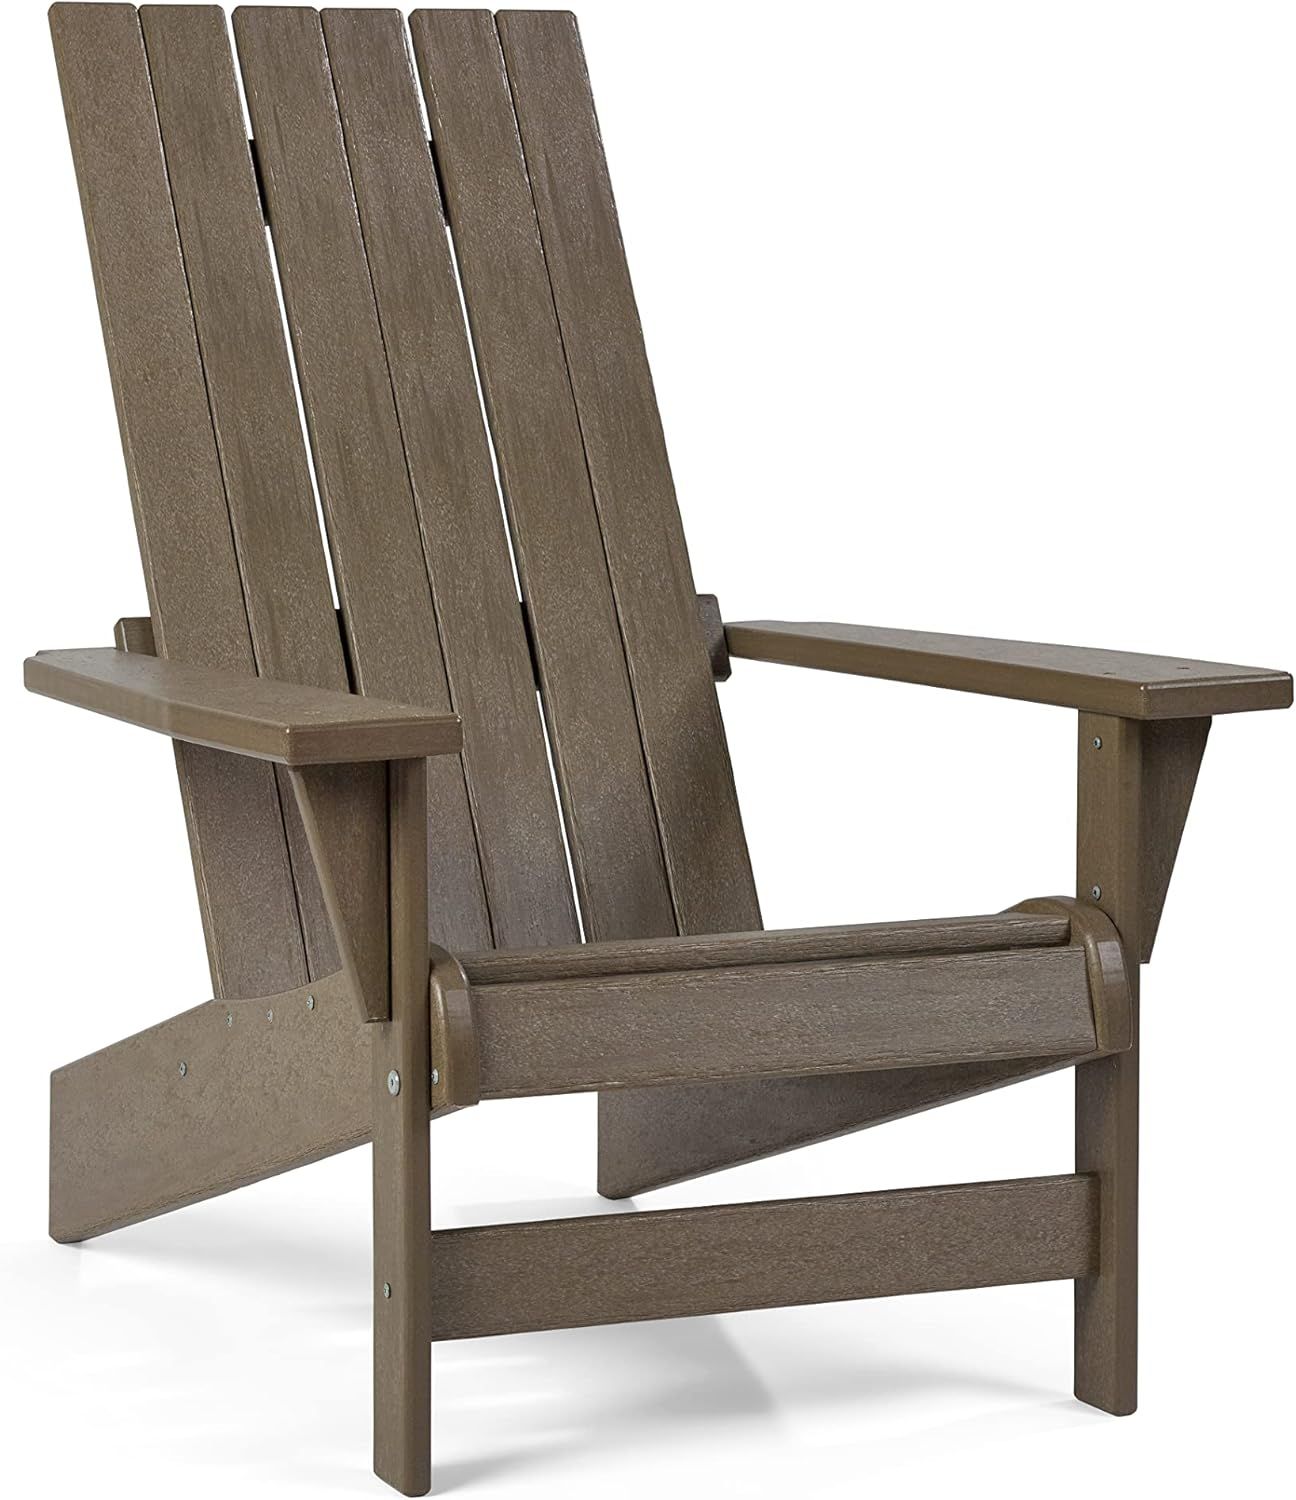 Keter Montauk Adirondack Chair with Weatherproof Finish, Outdoor Furniture for Entertaining by Th... | Amazon (US)